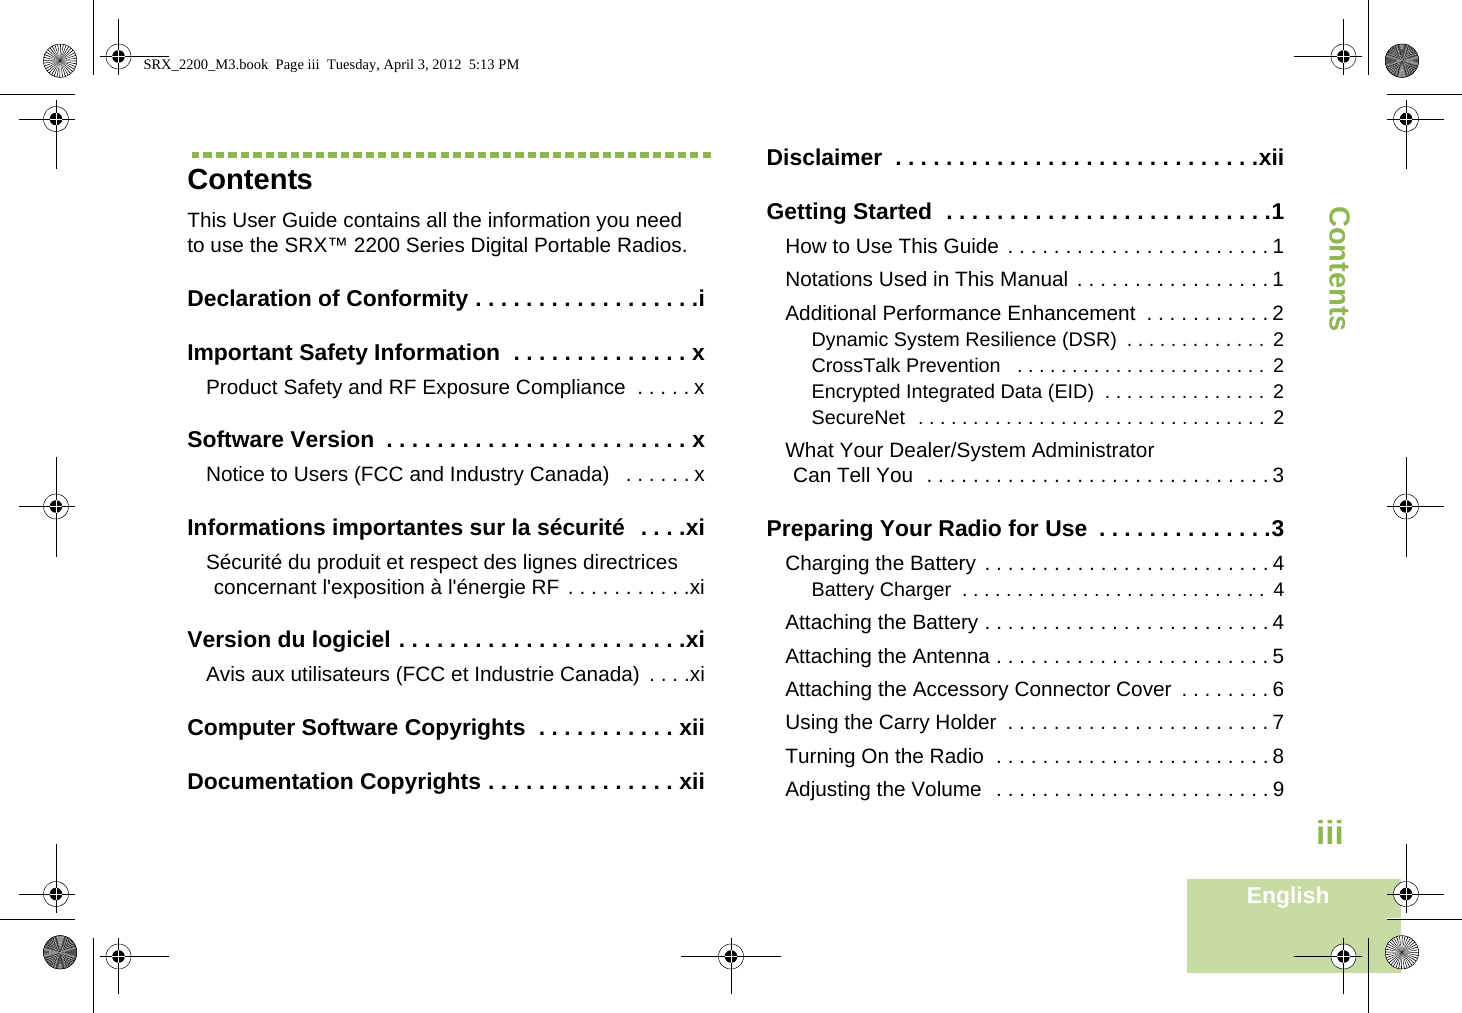 ContentsEnglishiiiContentsThis User Guide contains all the information you need to use the SRX™ 2200 Series Digital Portable Radios.Declaration of Conformity . . . . . . . . . . . . . . . . . .iImportant Safety Information  . . . . . . . . . . . . . . xProduct Safety and RF Exposure Compliance  . . . . . xSoftware Version  . . . . . . . . . . . . . . . . . . . . . . . . xNotice to Users (FCC and Industry Canada)   . . . . . . xInformations importantes sur la sécurité  . . . .xiSécurité du produit et respect des lignes directrices concernant l&apos;exposition à l&apos;énergie RF . . . . . . . . . . .xiVersion du logiciel . . . . . . . . . . . . . . . . . . . . . . .xiAvis aux utilisateurs (FCC et Industrie Canada)  . . . .xiComputer Software Copyrights  . . . . . . . . . . . xiiDocumentation Copyrights . . . . . . . . . . . . . . . xiiDisclaimer  . . . . . . . . . . . . . . . . . . . . . . . . . . . . .xiiGetting Started  . . . . . . . . . . . . . . . . . . . . . . . . . .1How to Use This Guide . . . . . . . . . . . . . . . . . . . . . . . 1Notations Used in This Manual . . . . . . . . . . . . . . . . . 1Additional Performance Enhancement  . . . . . . . . . . . 2Dynamic System Resilience (DSR)  . . . . . . . . . . . . .  2CrossTalk Prevention   . . . . . . . . . . . . . . . . . . . . . . .  2Encrypted Integrated Data (EID)  . . . . . . . . . . . . . . .  2SecureNet  . . . . . . . . . . . . . . . . . . . . . . . . . . . . . . . .  2What Your Dealer/System AdministratorCan Tell You  . . . . . . . . . . . . . . . . . . . . . . . . . . . . . . 3Preparing Your Radio for Use  . . . . . . . . . . . . . .3Charging the Battery . . . . . . . . . . . . . . . . . . . . . . . . . 4Battery Charger  . . . . . . . . . . . . . . . . . . . . . . . . . . . .  4Attaching the Battery . . . . . . . . . . . . . . . . . . . . . . . . . 4Attaching the Antenna . . . . . . . . . . . . . . . . . . . . . . . . 5Attaching the Accessory Connector Cover  . . . . . . . . 6Using the Carry Holder  . . . . . . . . . . . . . . . . . . . . . . . 7Turning On the Radio  . . . . . . . . . . . . . . . . . . . . . . . . 8Adjusting the Volume  . . . . . . . . . . . . . . . . . . . . . . . . 9SRX_2200_M3.book  Page iii  Tuesday, April 3, 2012  5:13 PM